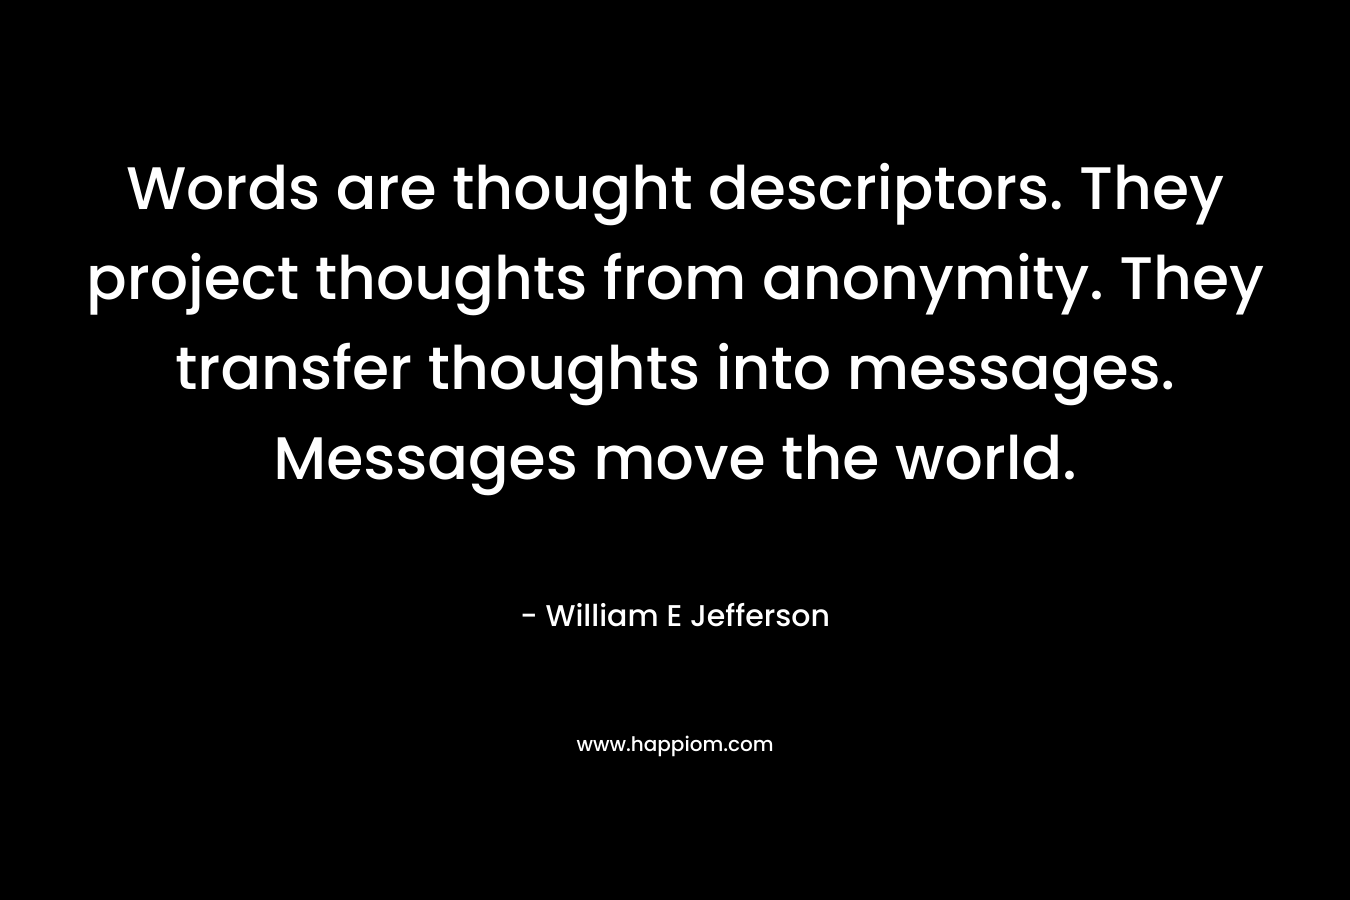 Words are thought descriptors. They project thoughts from anonymity. They transfer thoughts into messages. Messages move the world.